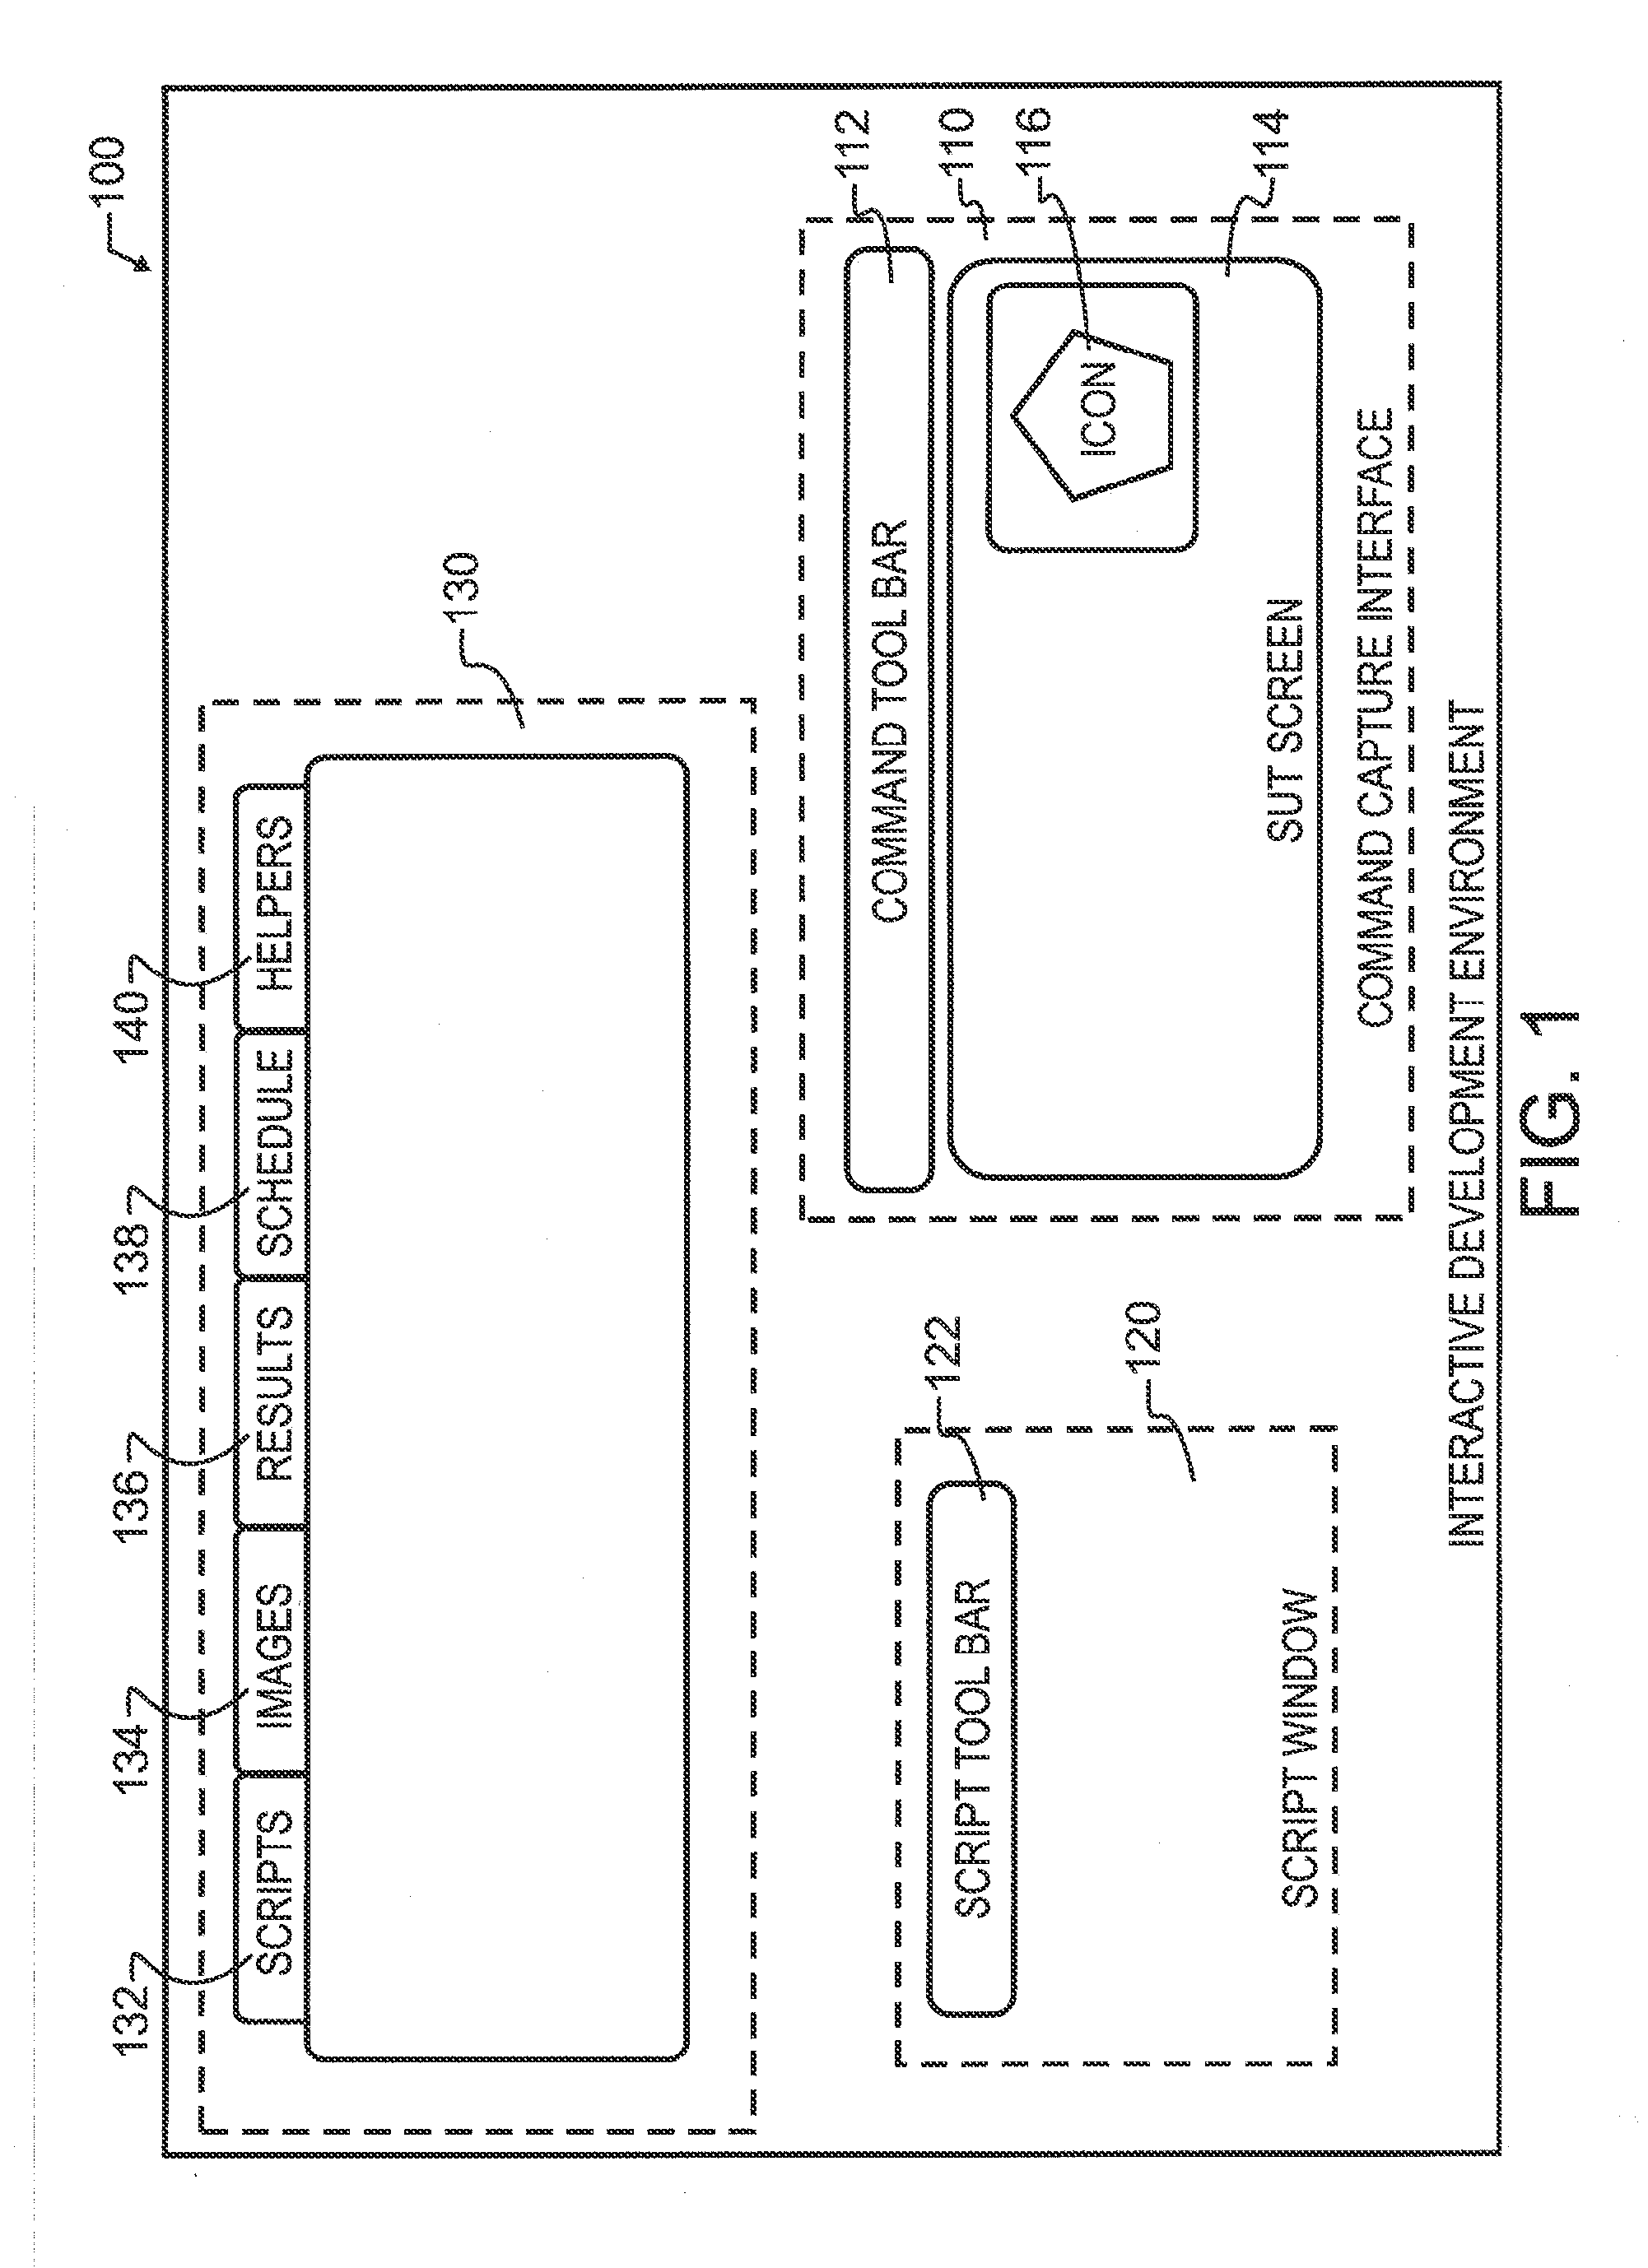 Method for monitoring a graphical user interface on a second computer display from a first computer